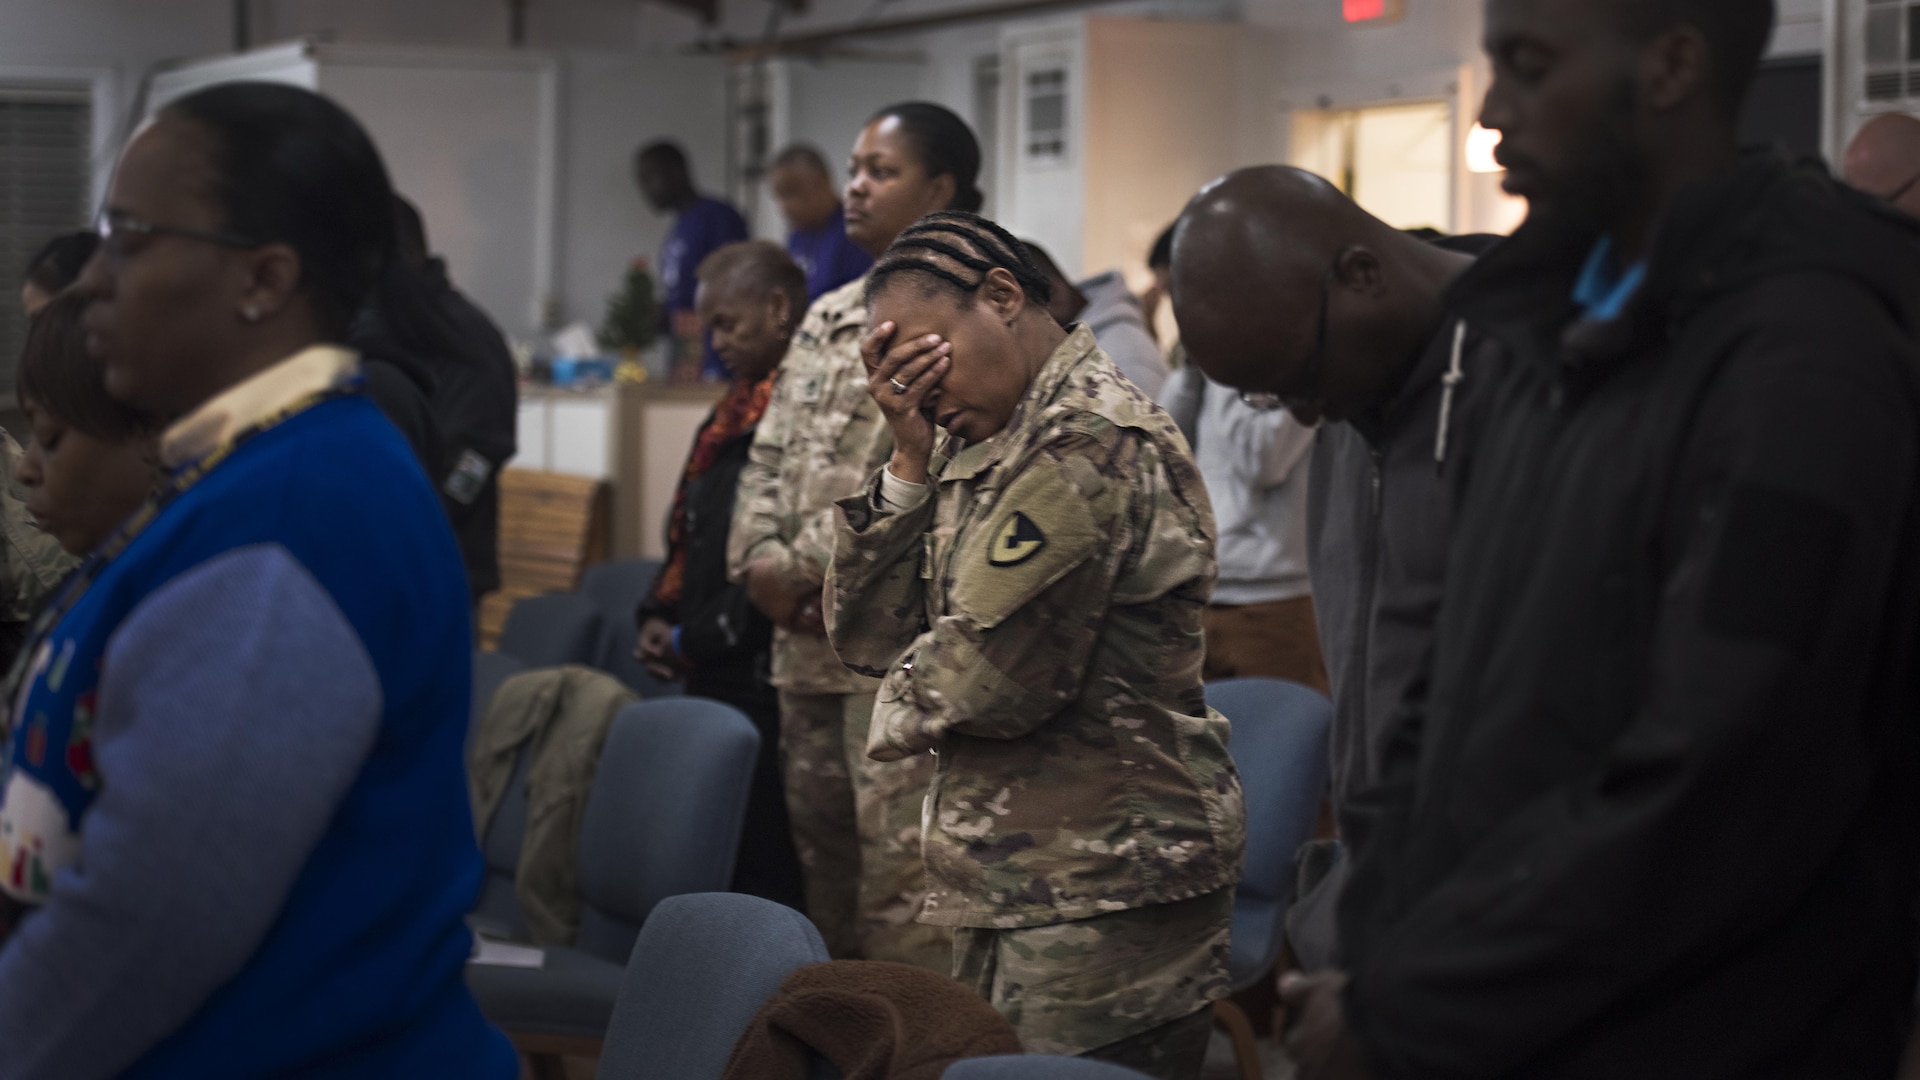 Sgt. Maj. Velma Lyons, Army Field Support Battalion-Afghanistan battalion sergeant major, prays during a Christmas gospel service Dec. 25, 2016 at the Enduring Faith Chapel, Bagram Airfield, Afghanistan. While holidays away from families can be challenging, service members celebrated Christmas by attending church and spending time with friends. (U.S. Air Force photo by Staff Sgt. Katherine Spessa)